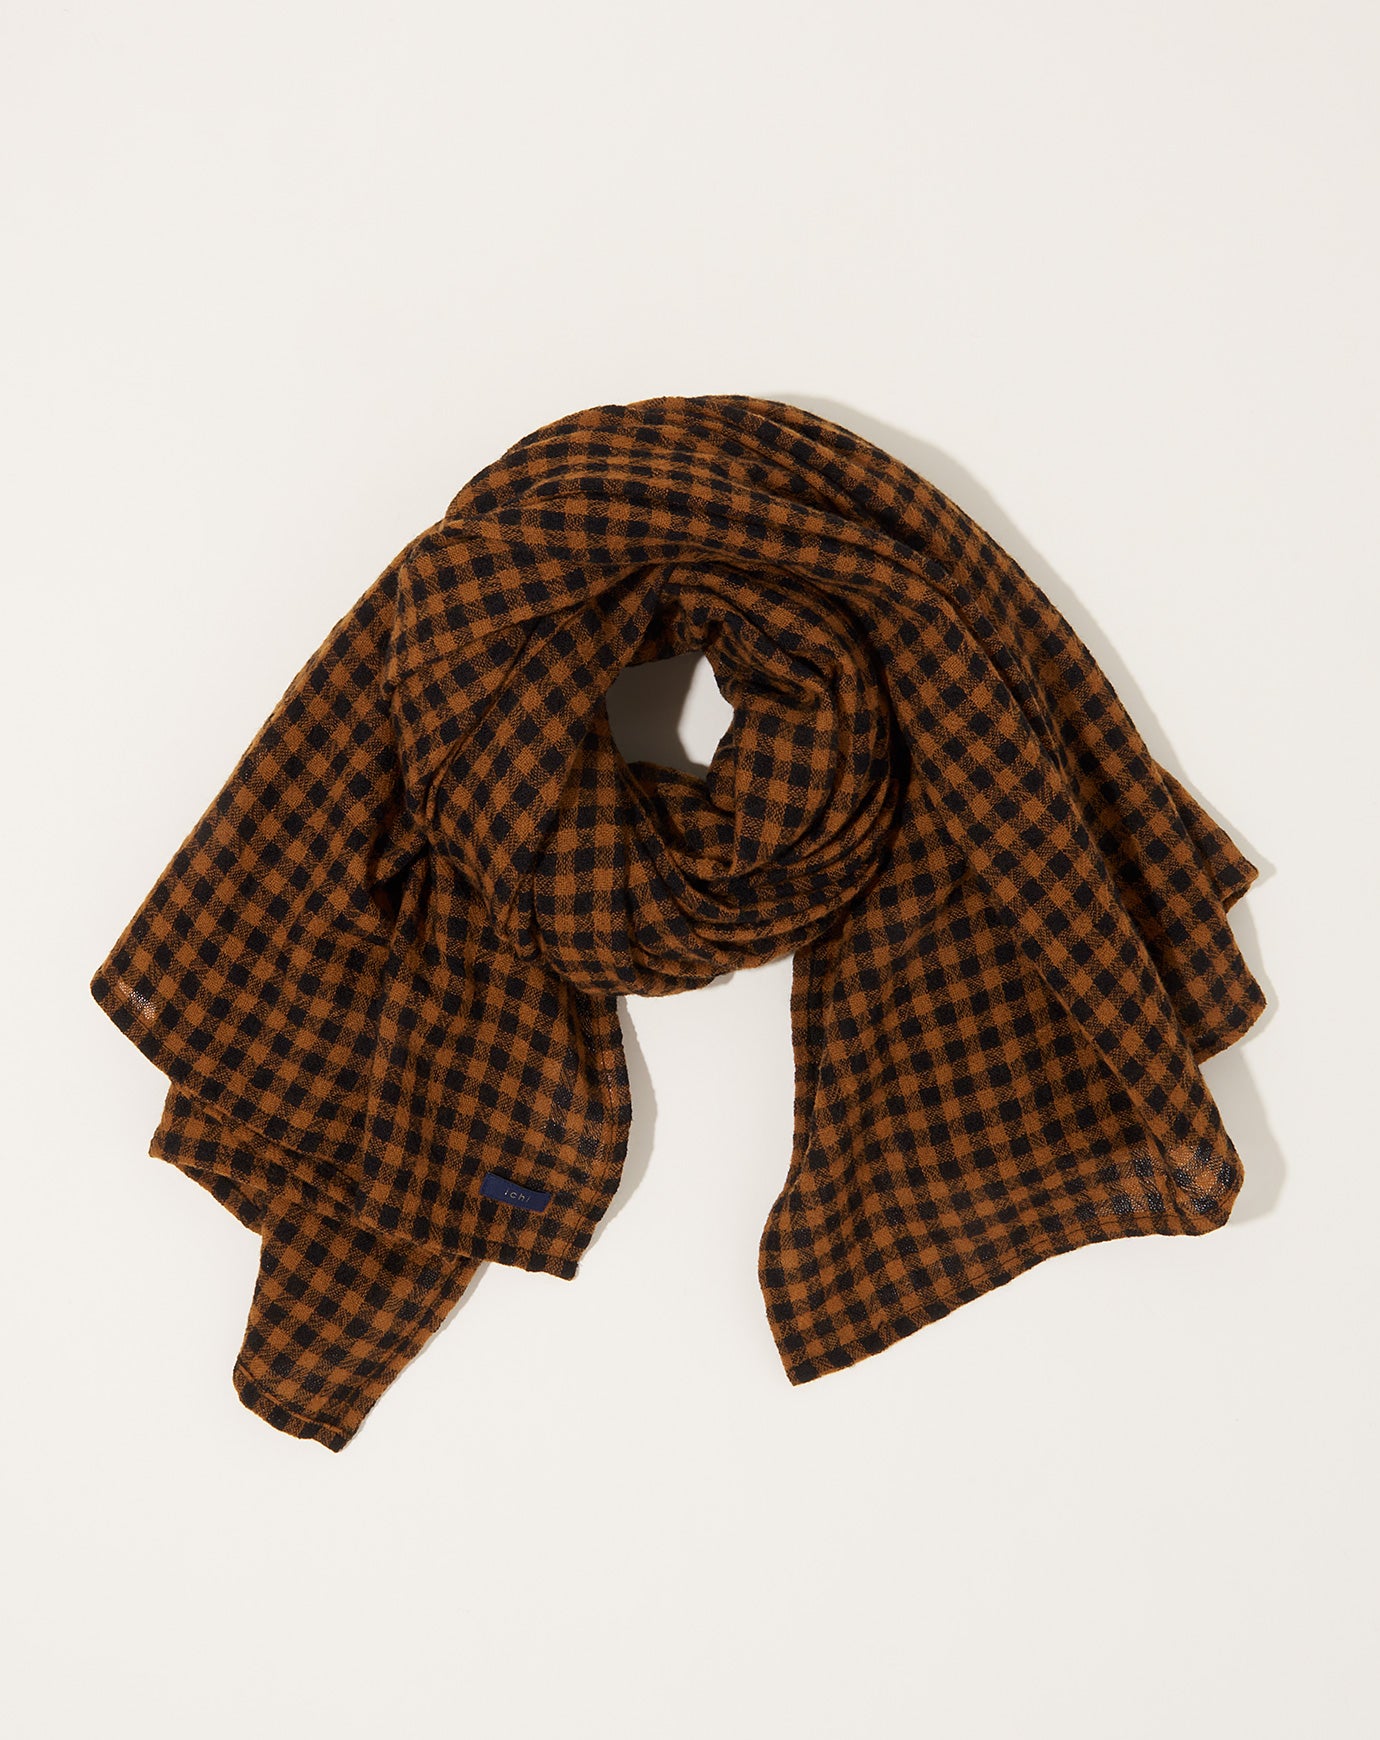 Ichi Check Stole in Mustard and Black